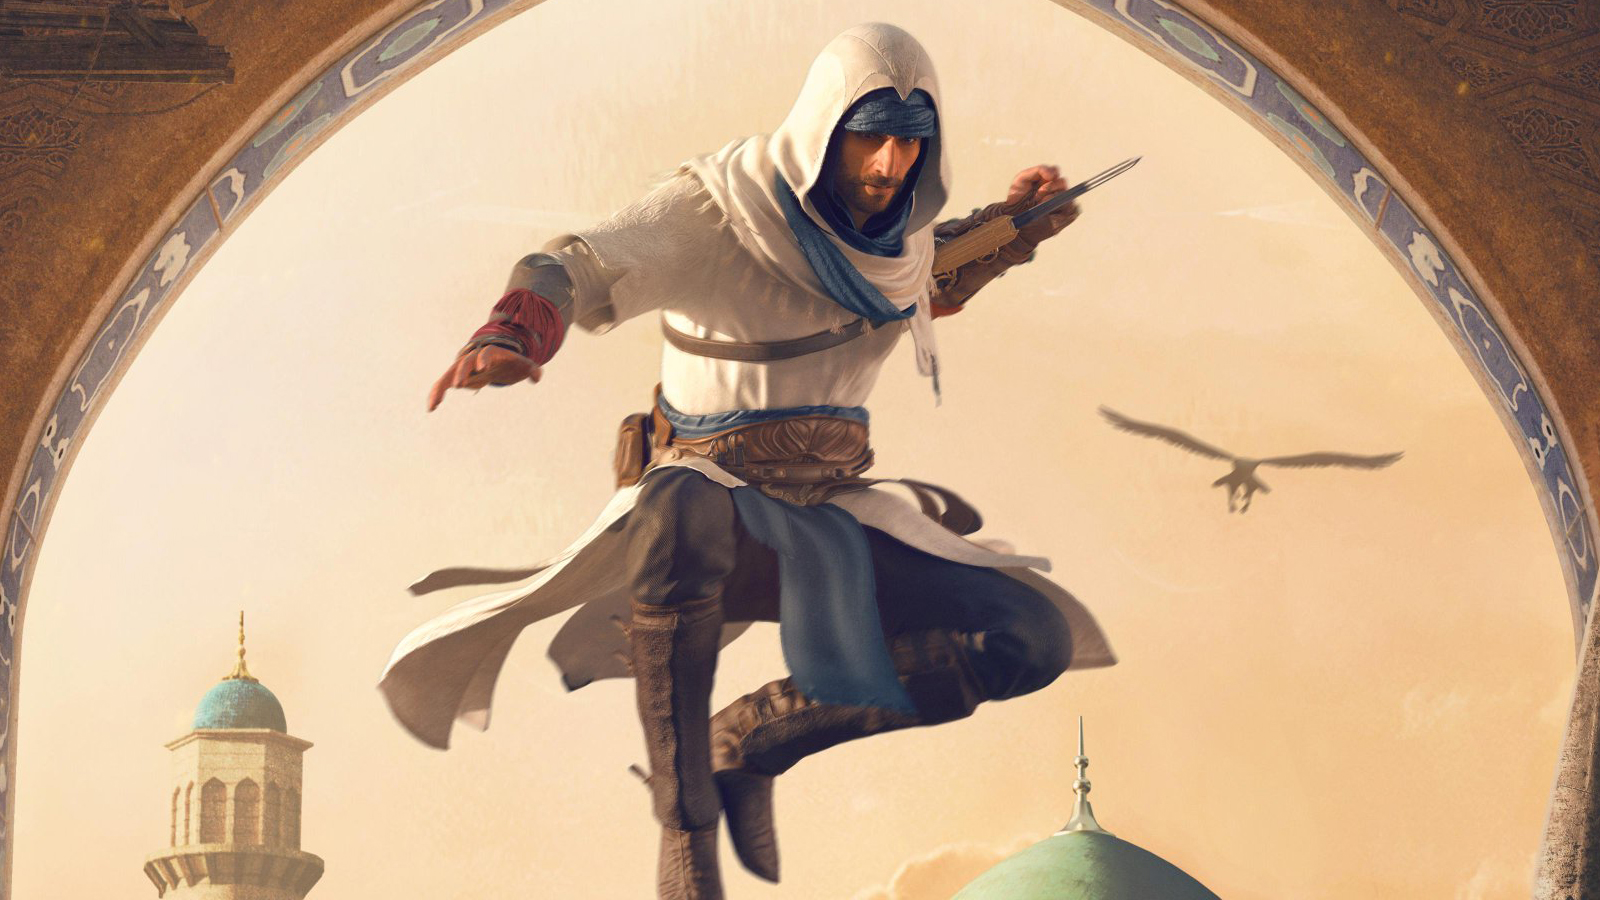 Assassin's Creed Mirage has popular assassinations from earlier games